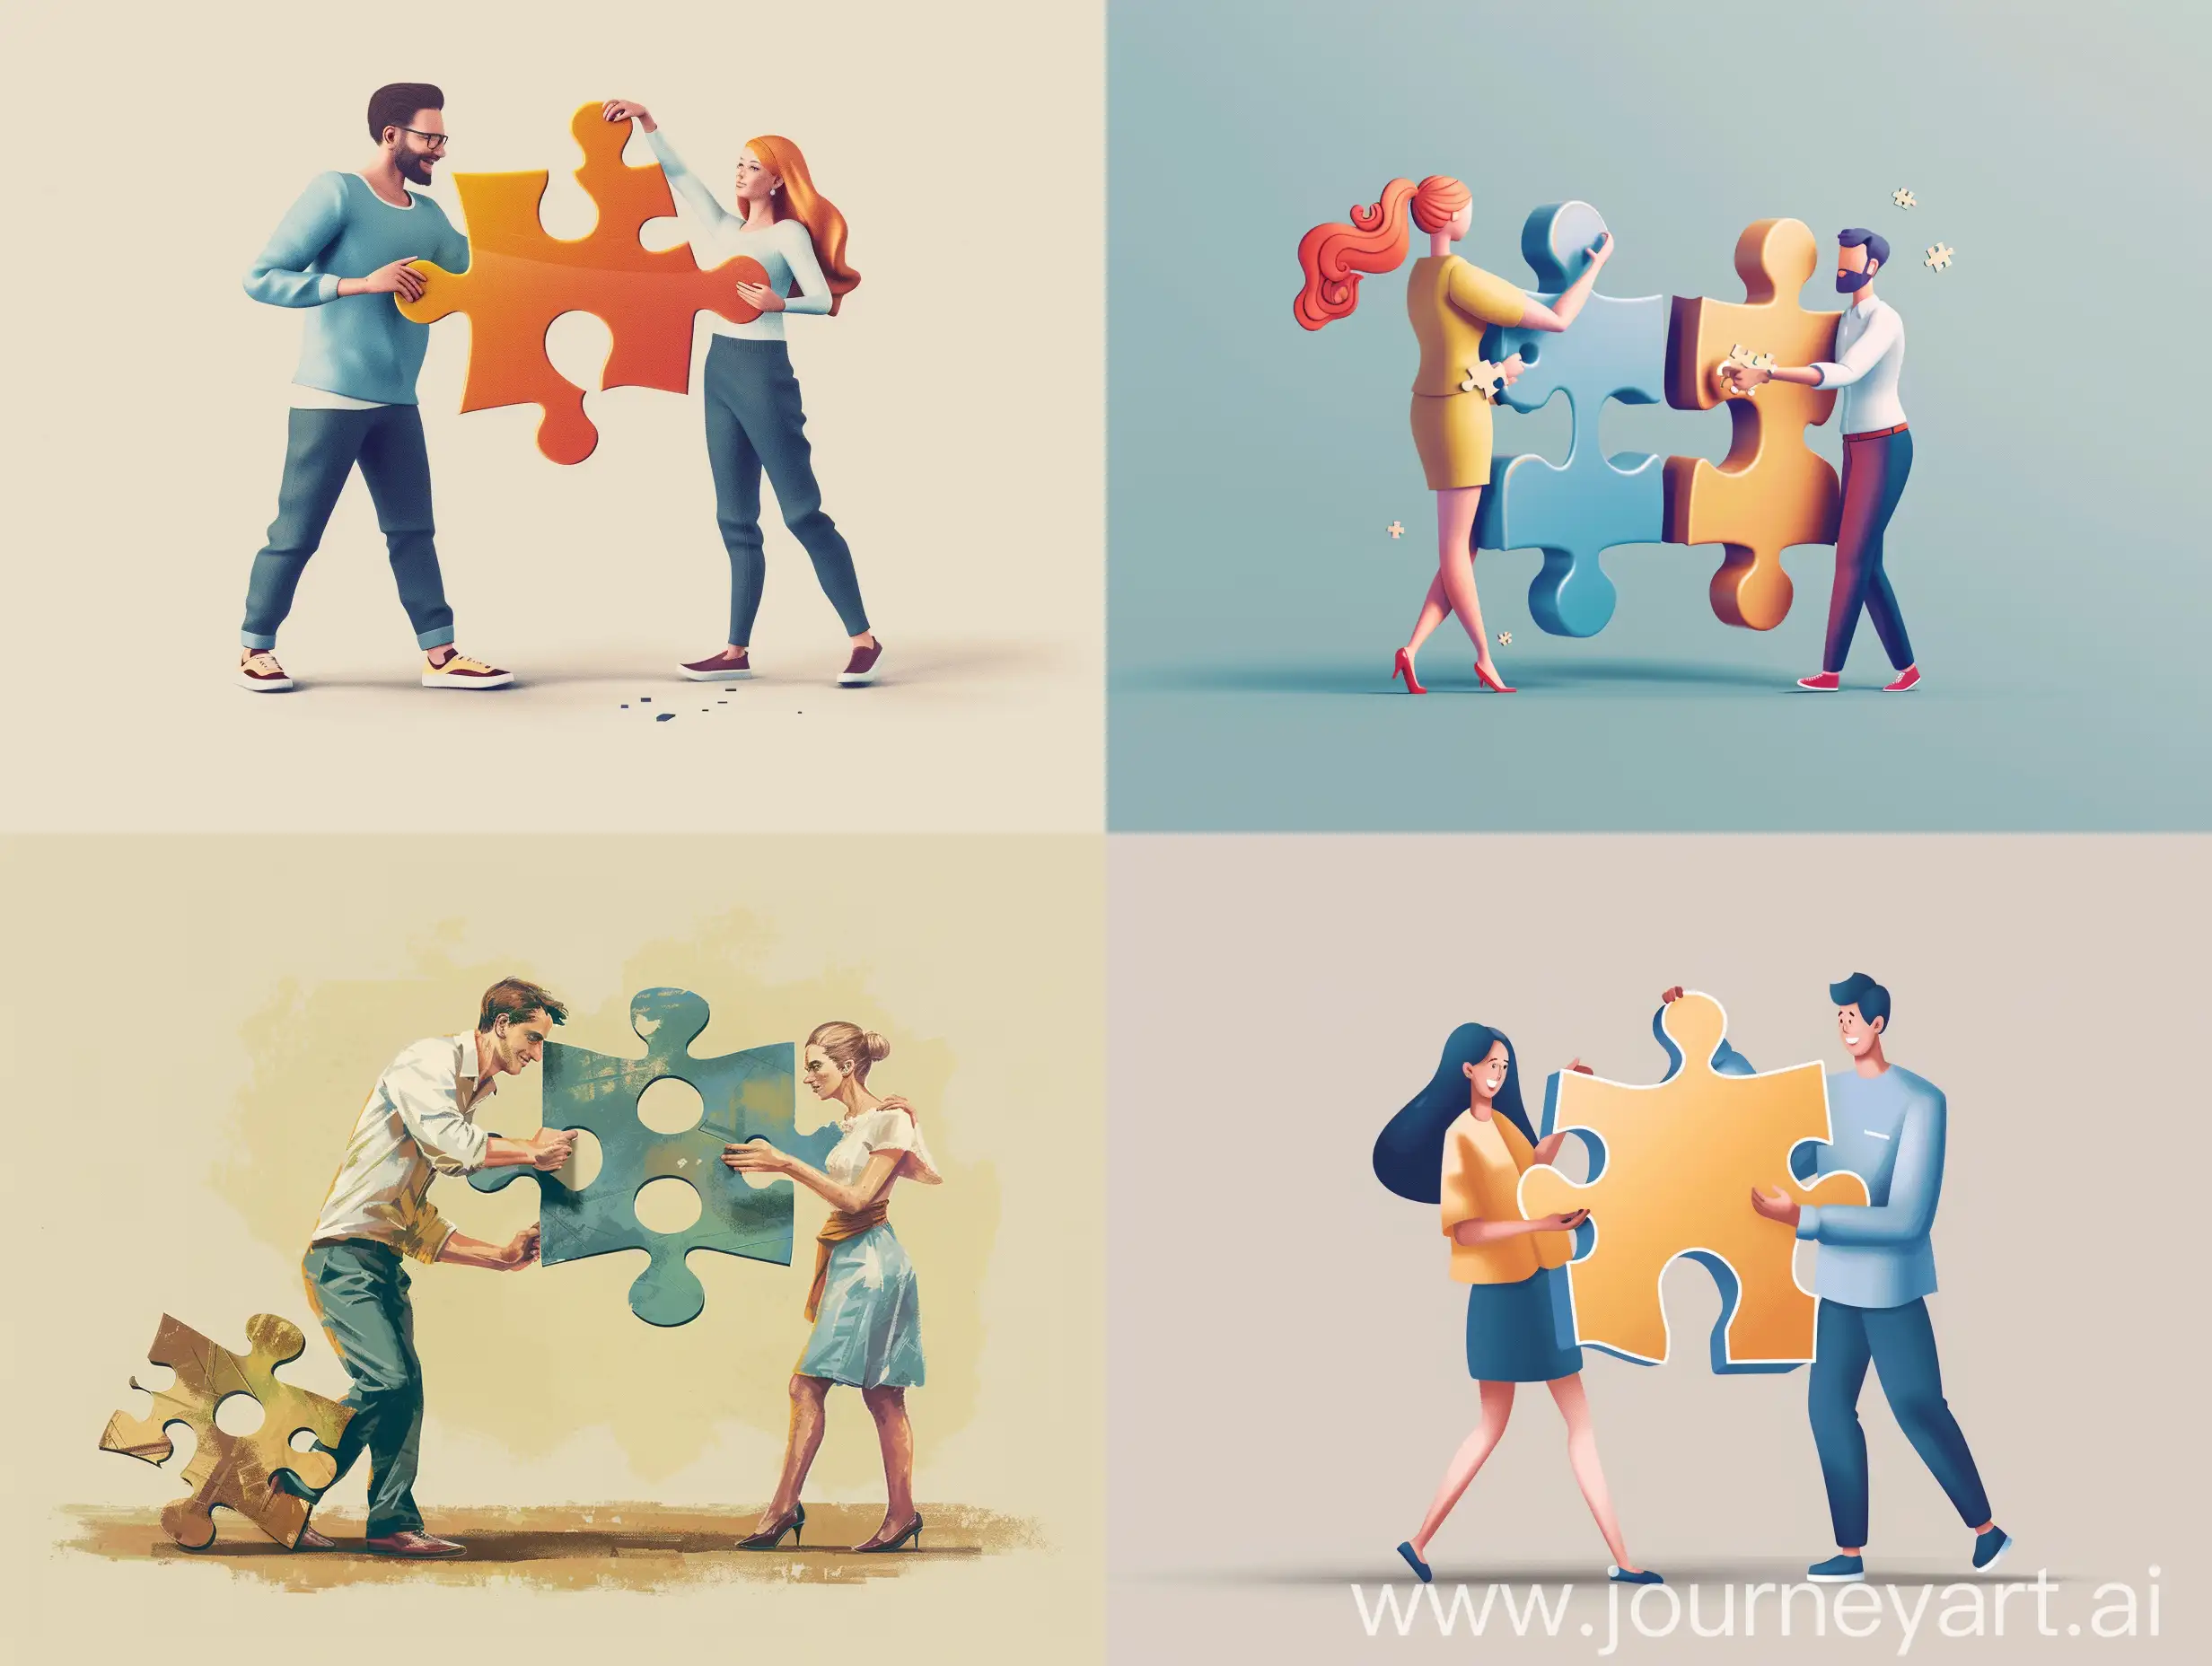 Collaborative-Puzzle-Solving-Man-and-Woman-Working-Together-on-a-Large-Puzzle